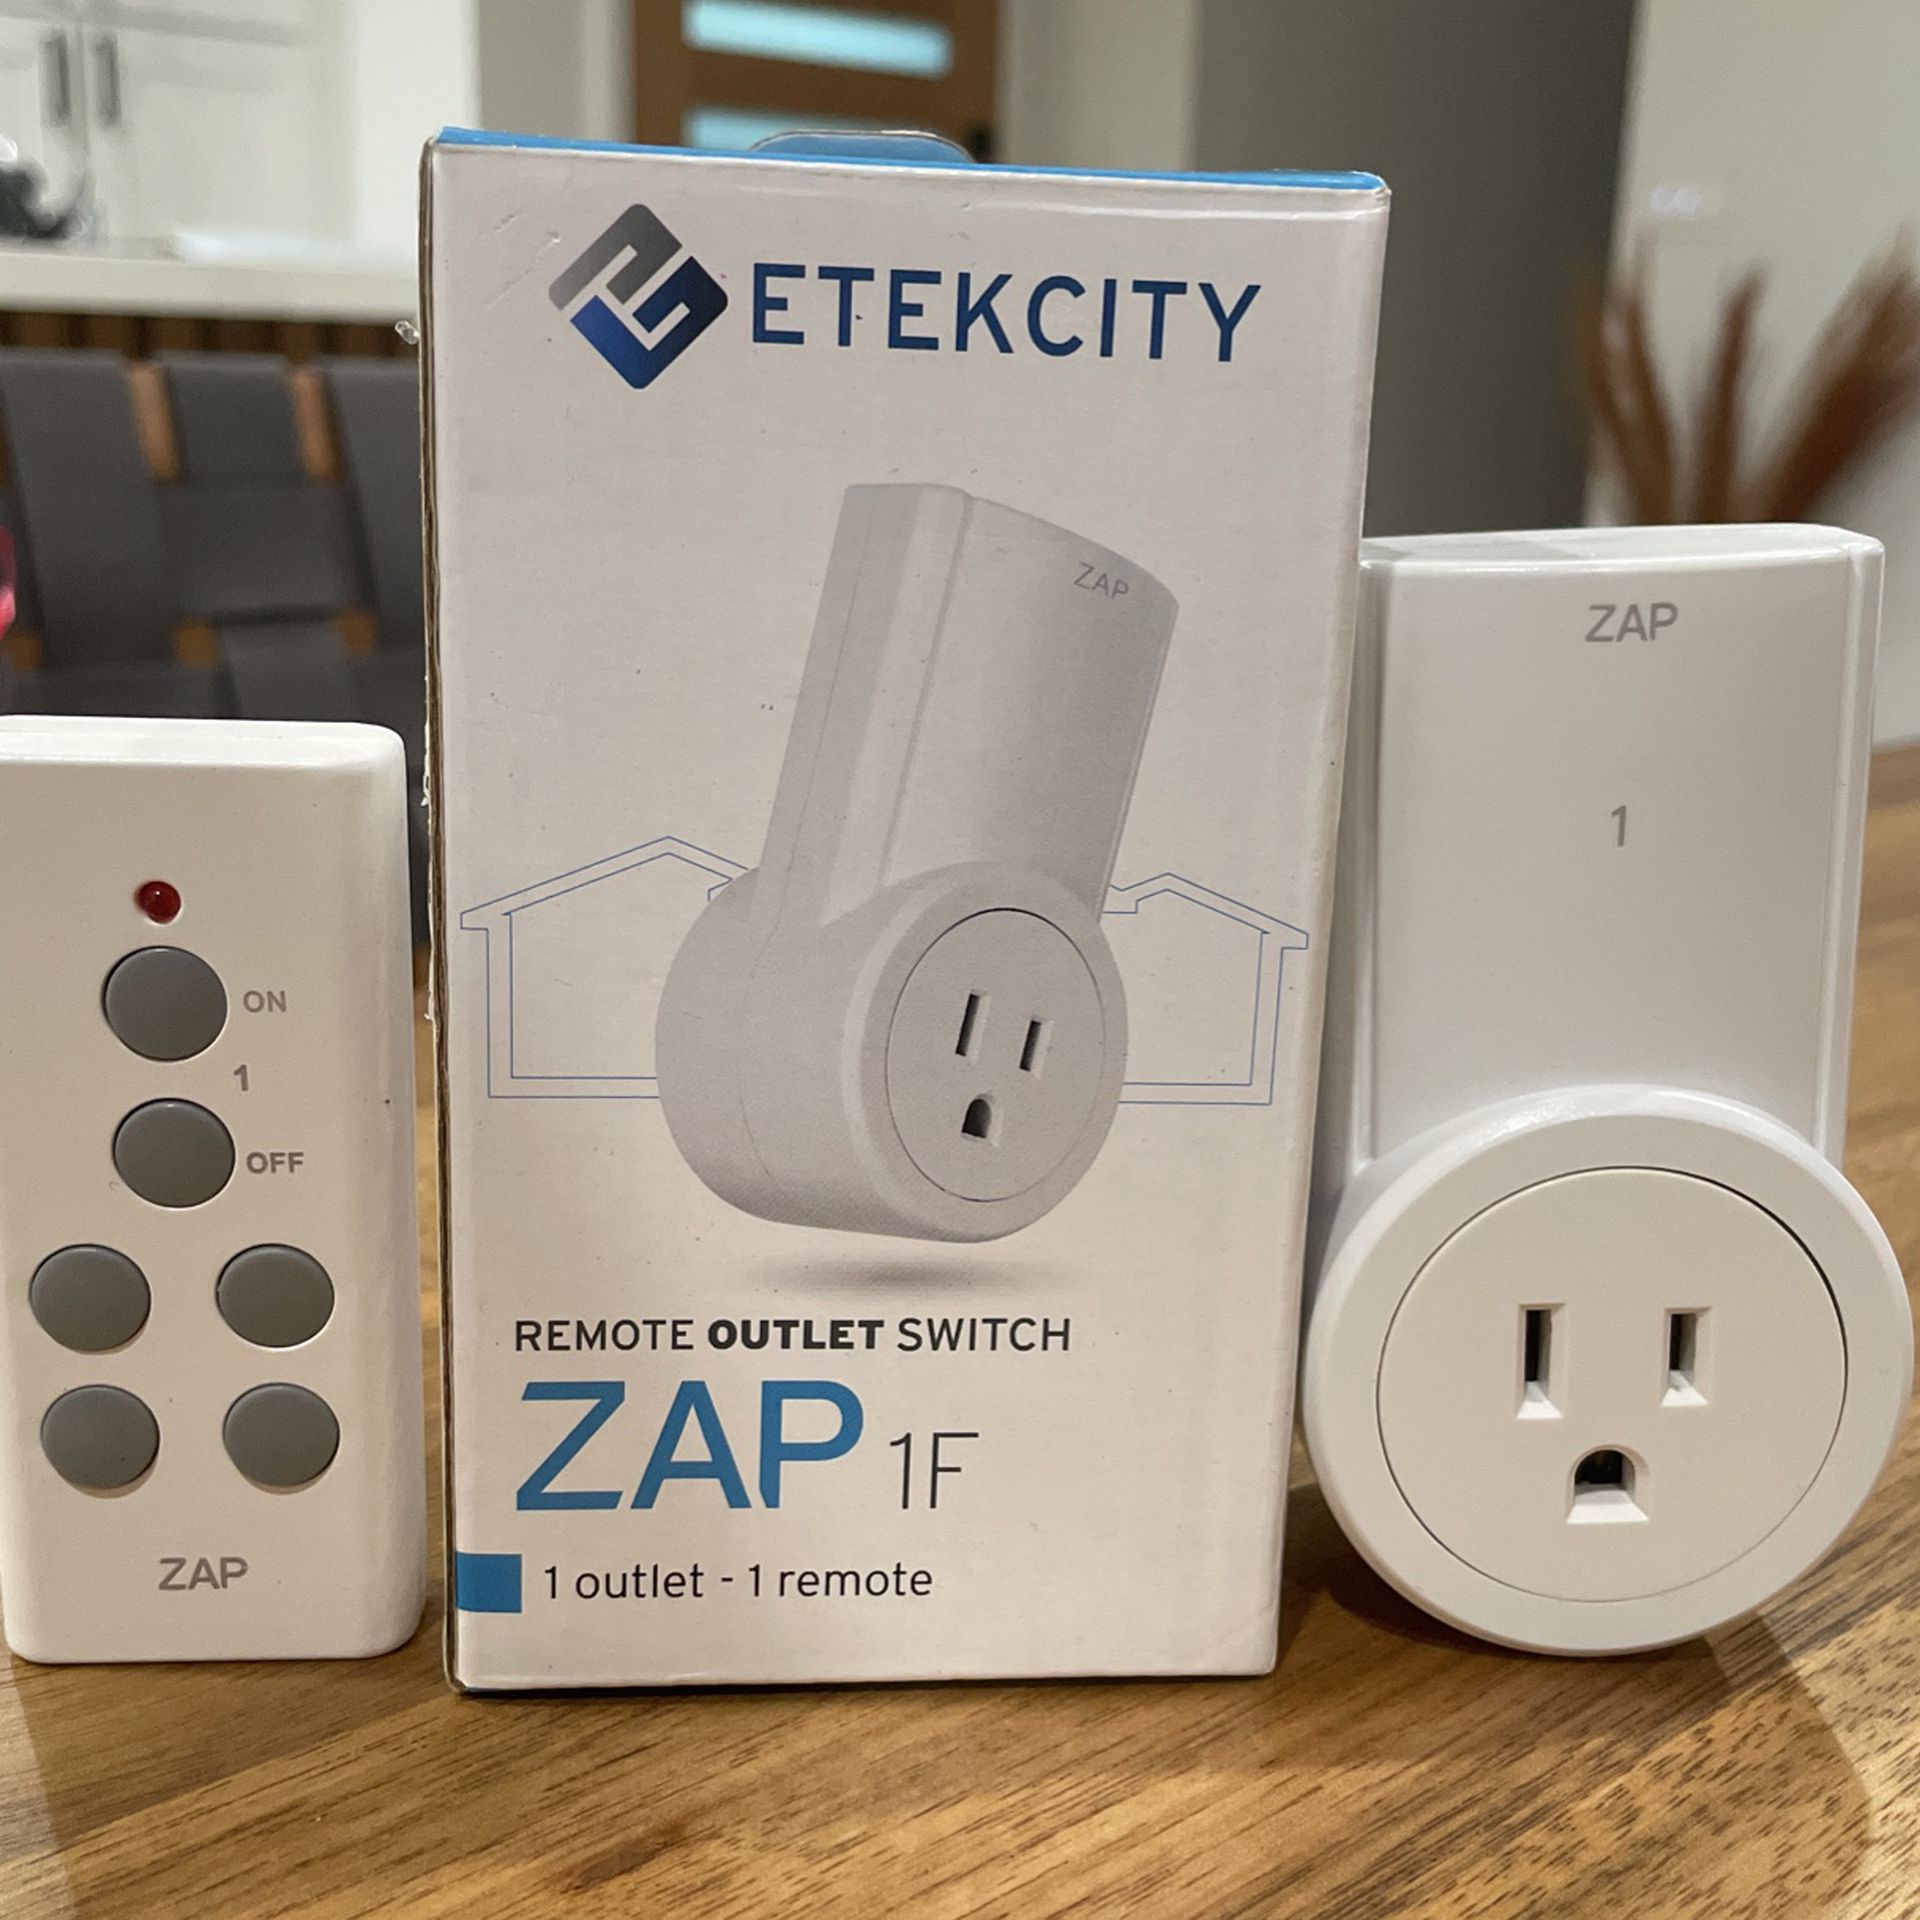 Etekcity Remote Outlet Switch (1 Outlet, 1 Remote)